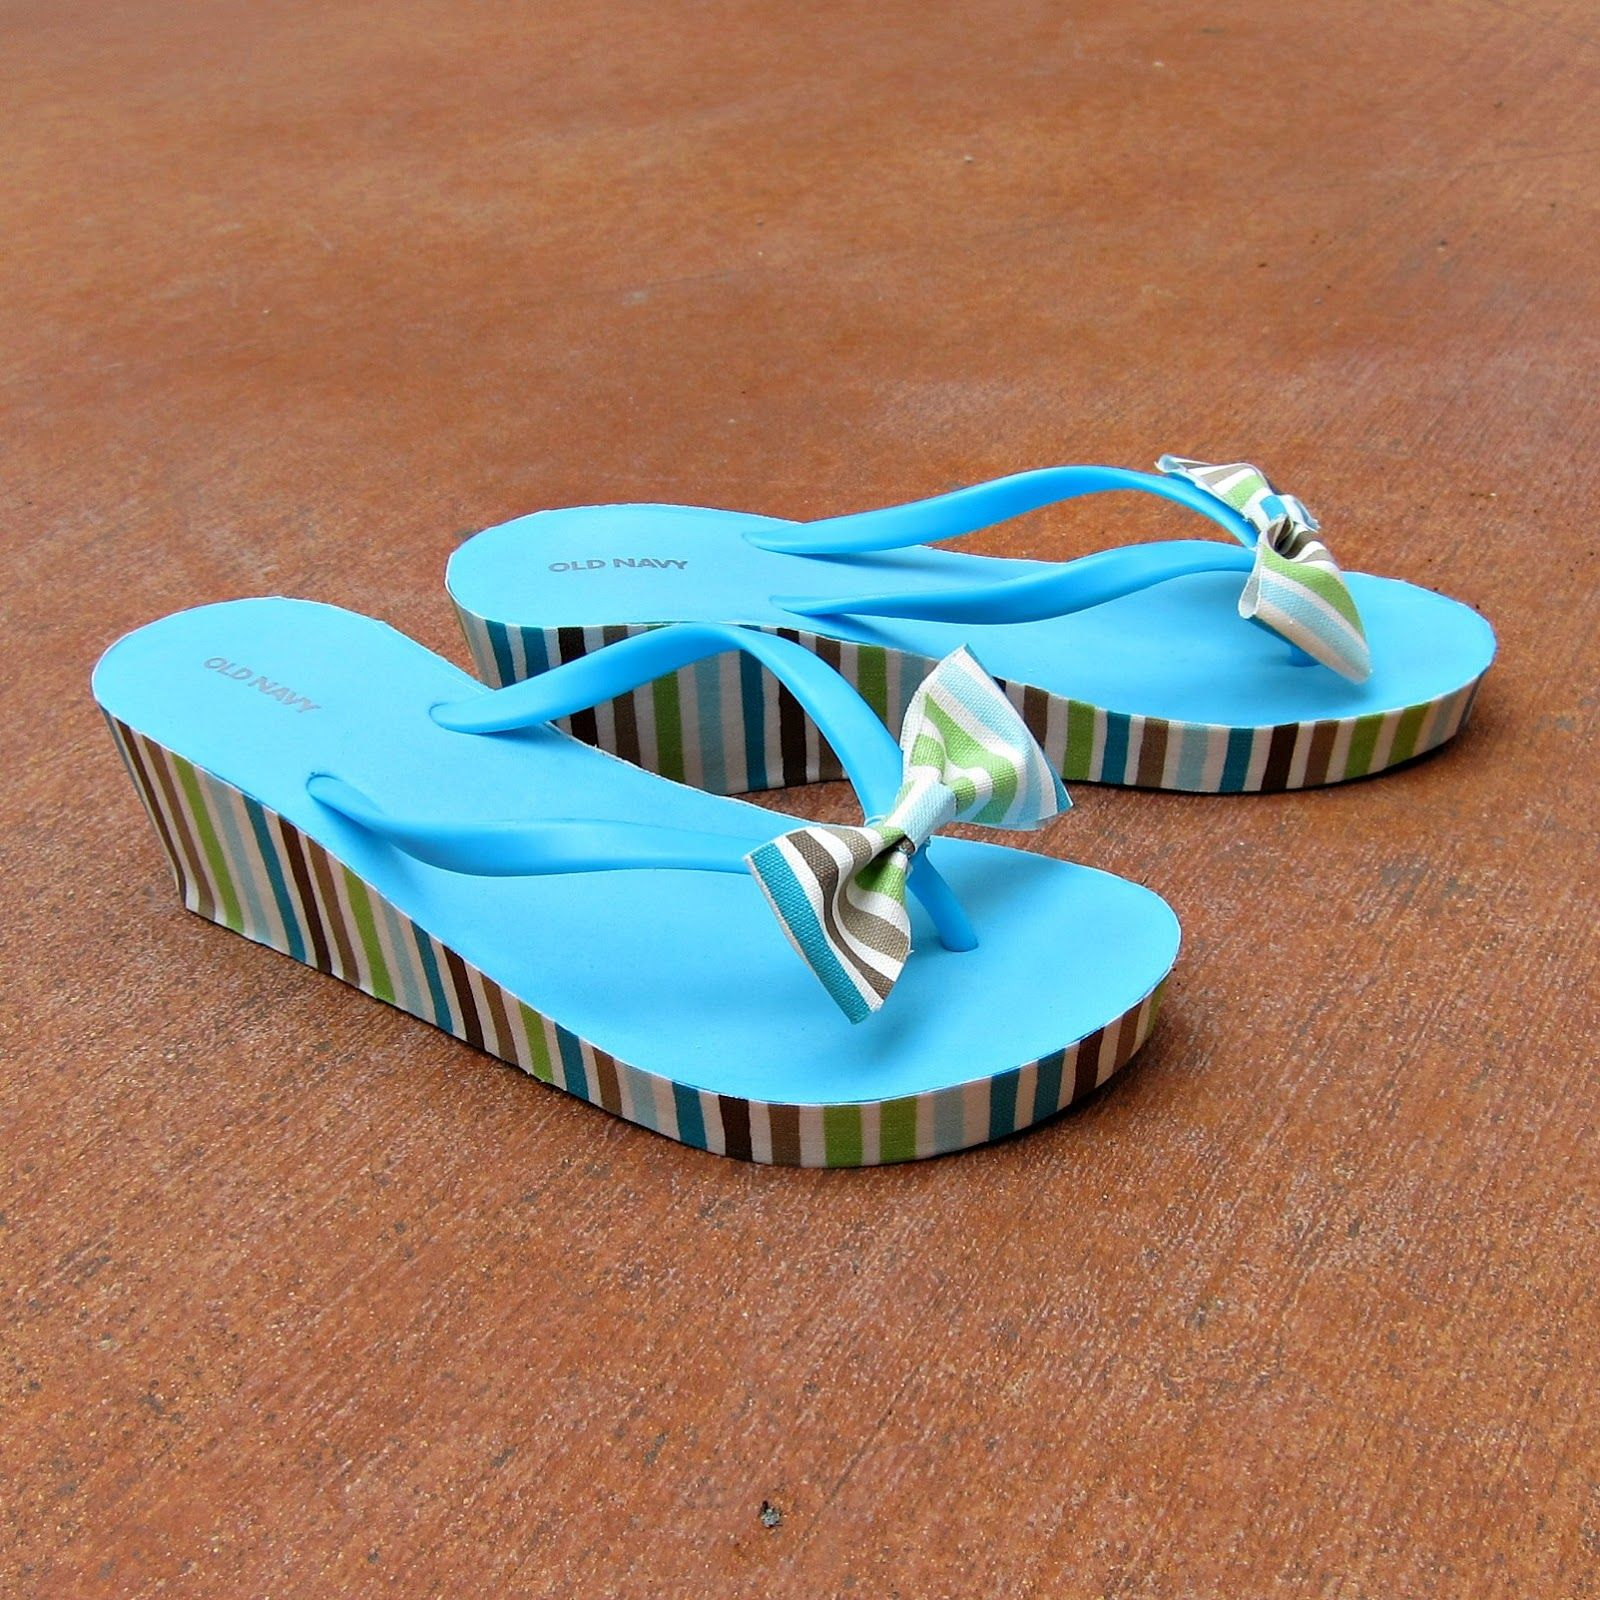 Mod podge soled flip flops DIY Picturesque Flip Flops Ideas That Are Great For Indoor Or Beach Day